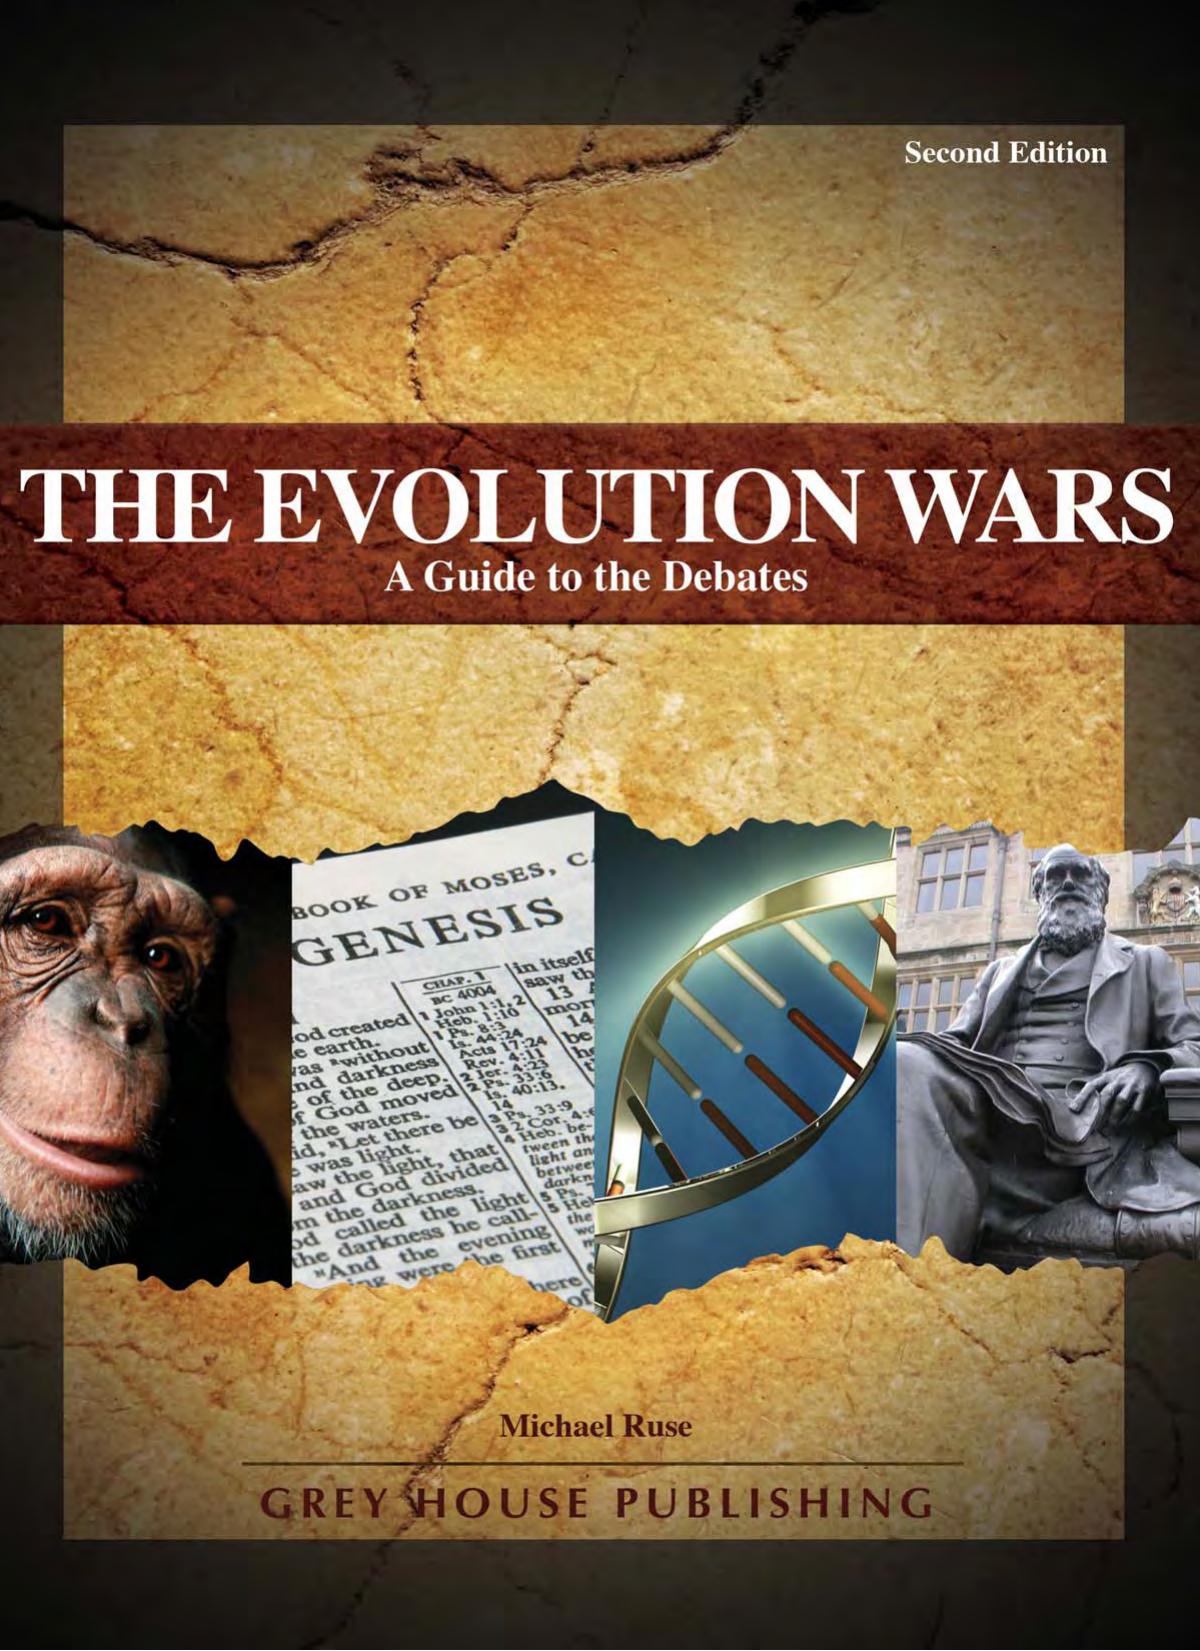 The Evolution Wars: A Guide to the Debates